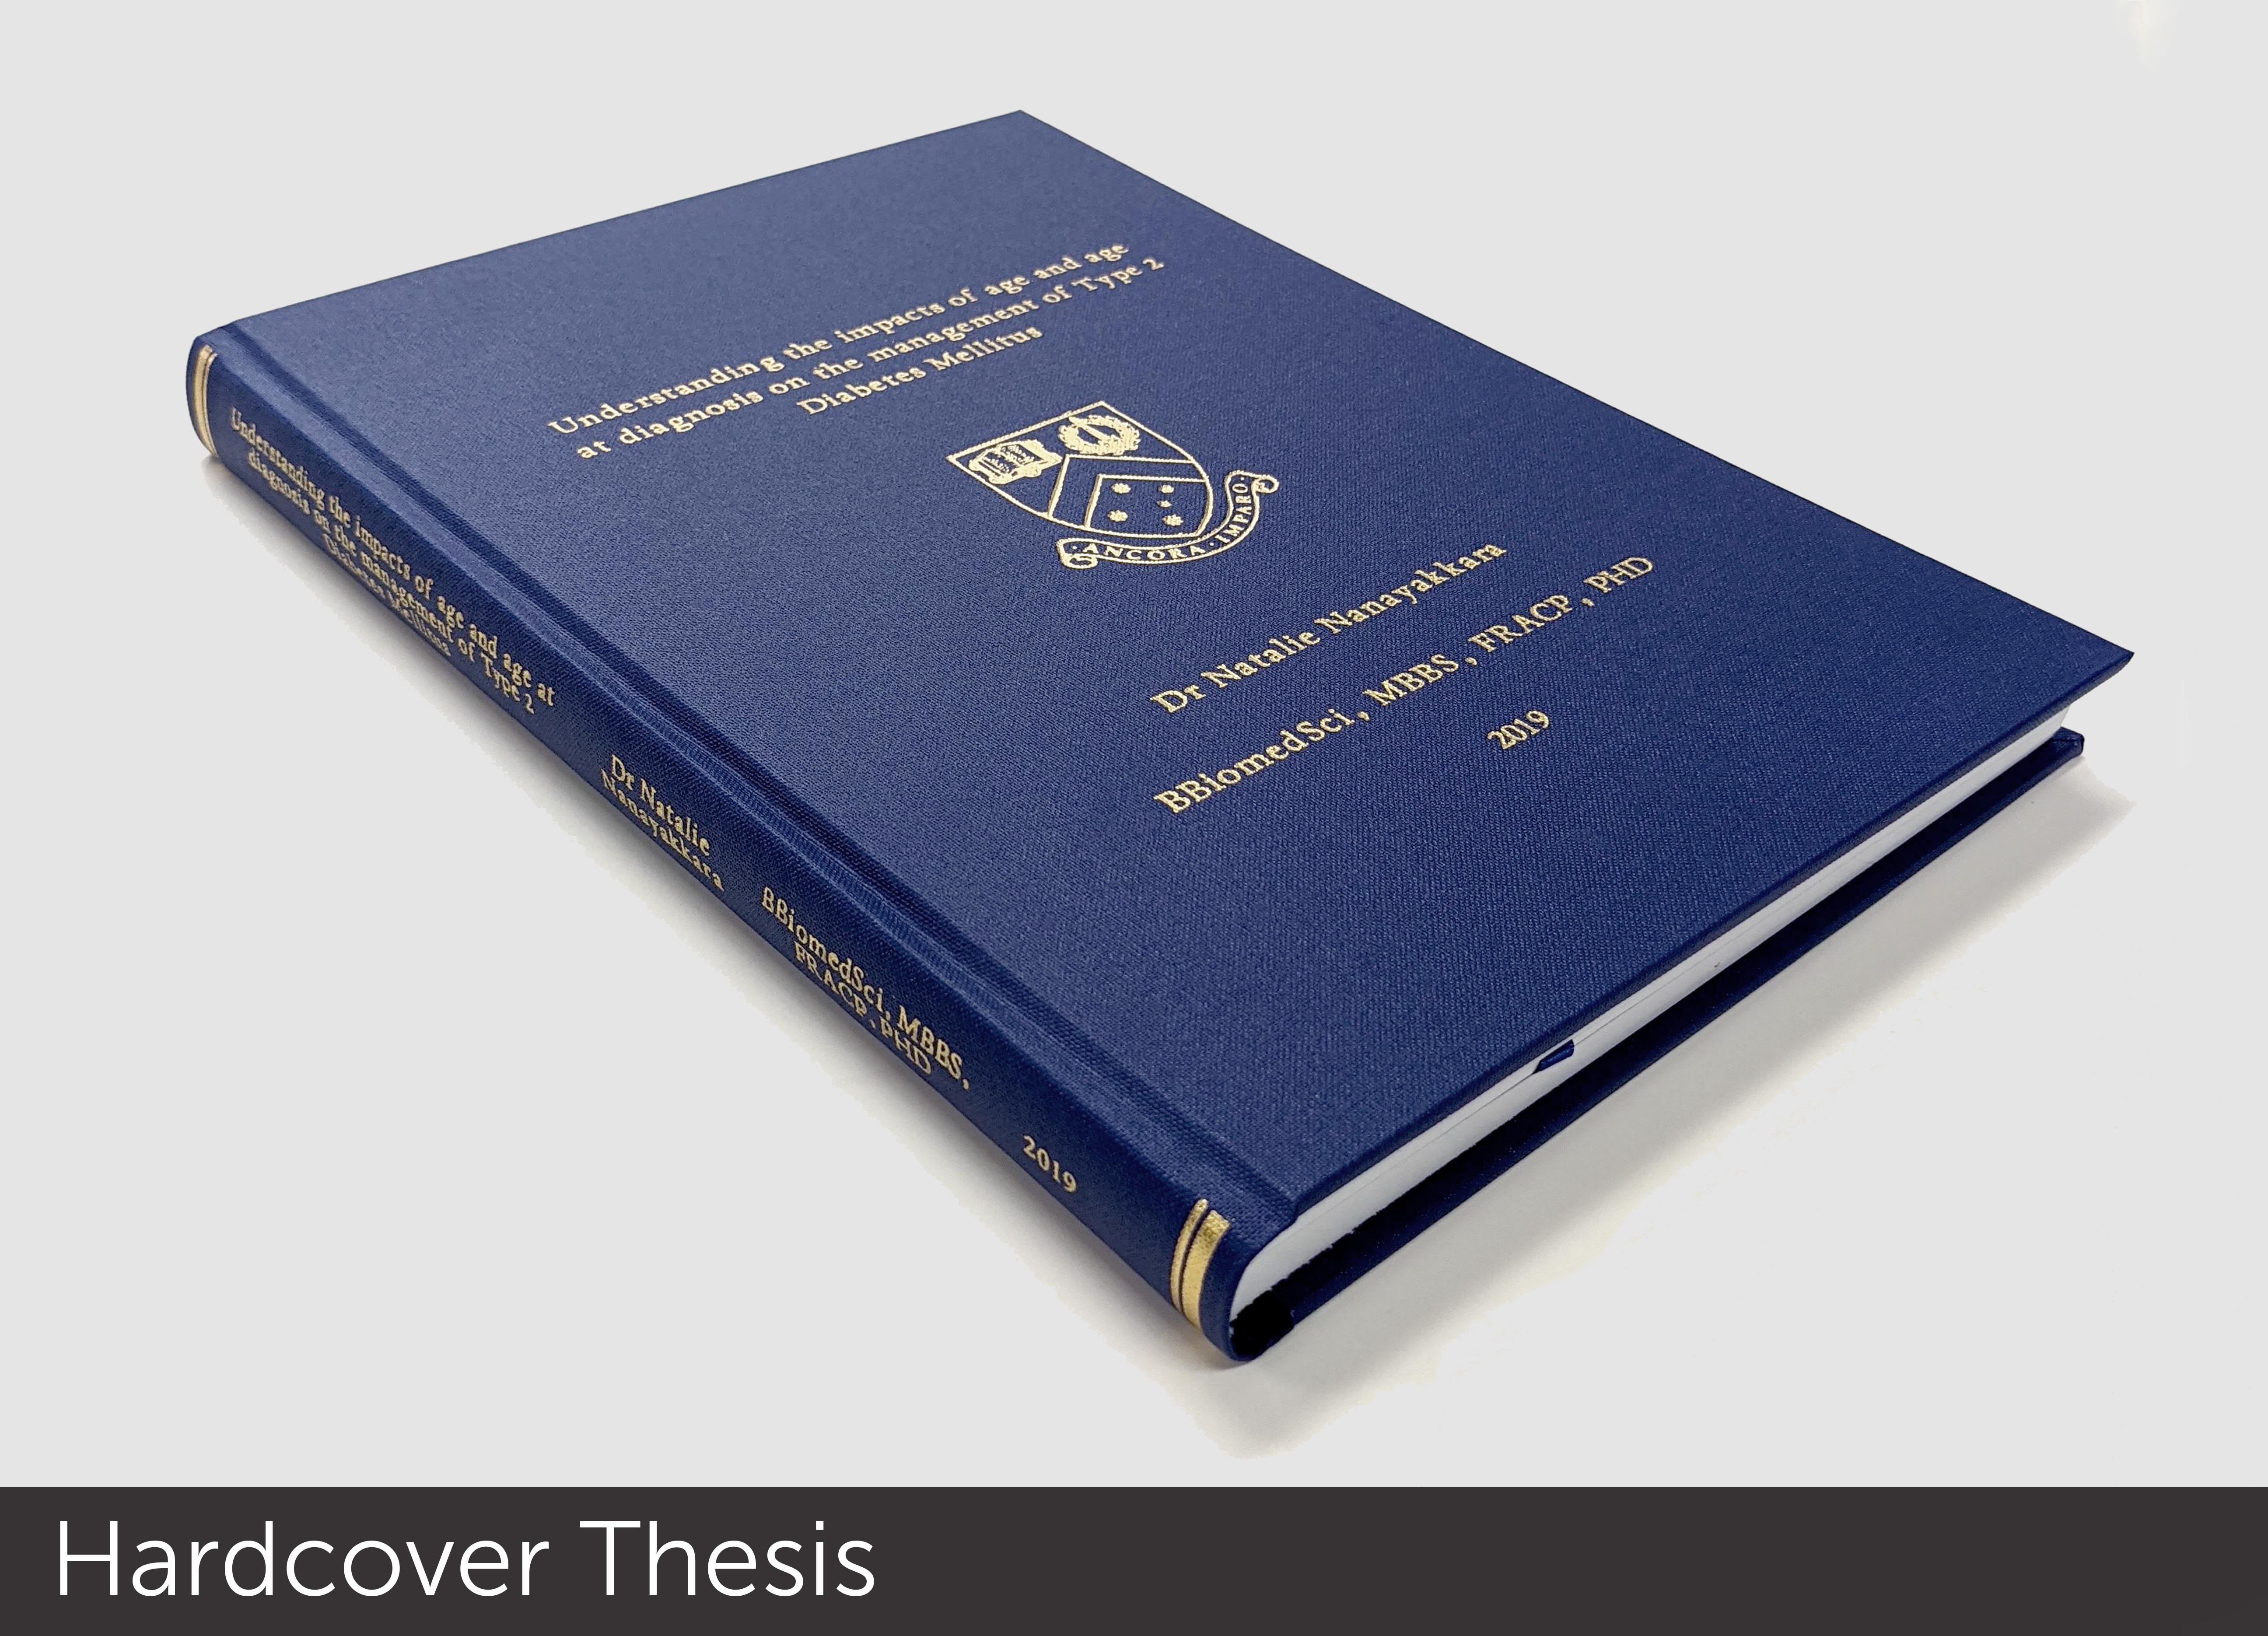 thesis binding service